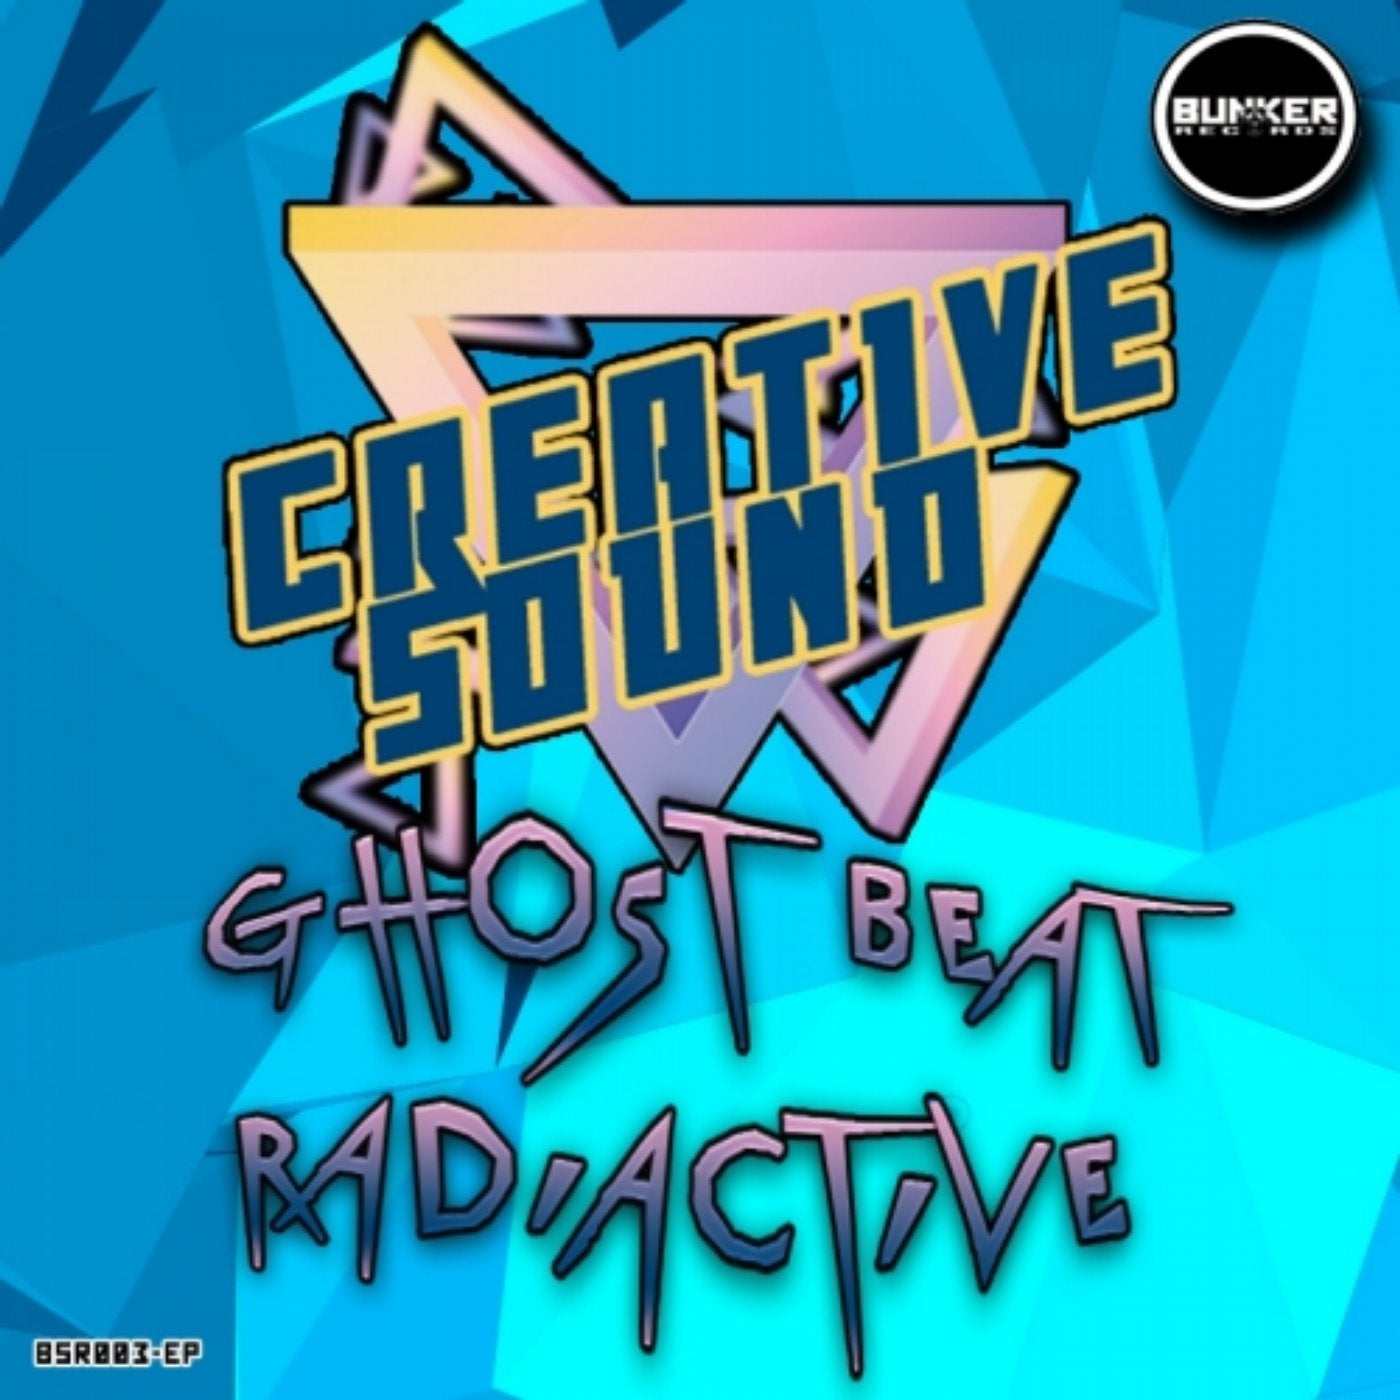 Ghost Beat EP